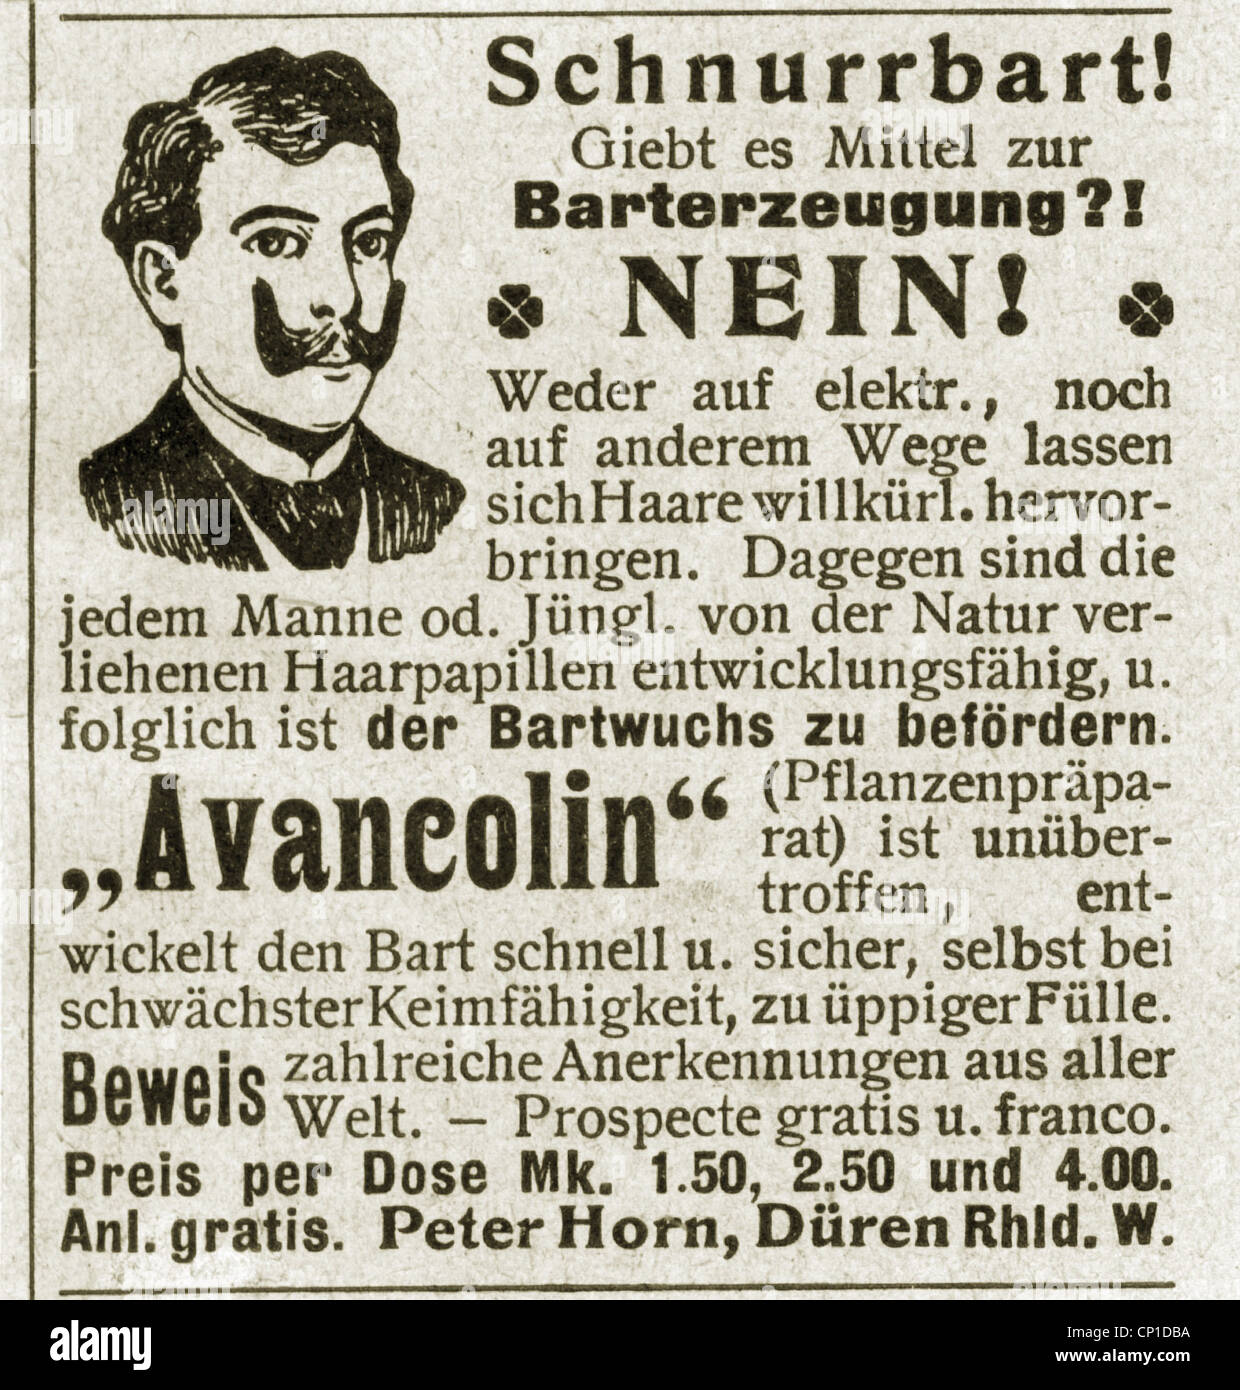 advertising, cosmetics, advertisement, beard hair growth tonic "Avancolin", by Peter Horn, Dueren, Germany, "Die Woche", No. 45, 30.11.1901, Additional-Rights-Clearences-Not Available Stock Photo